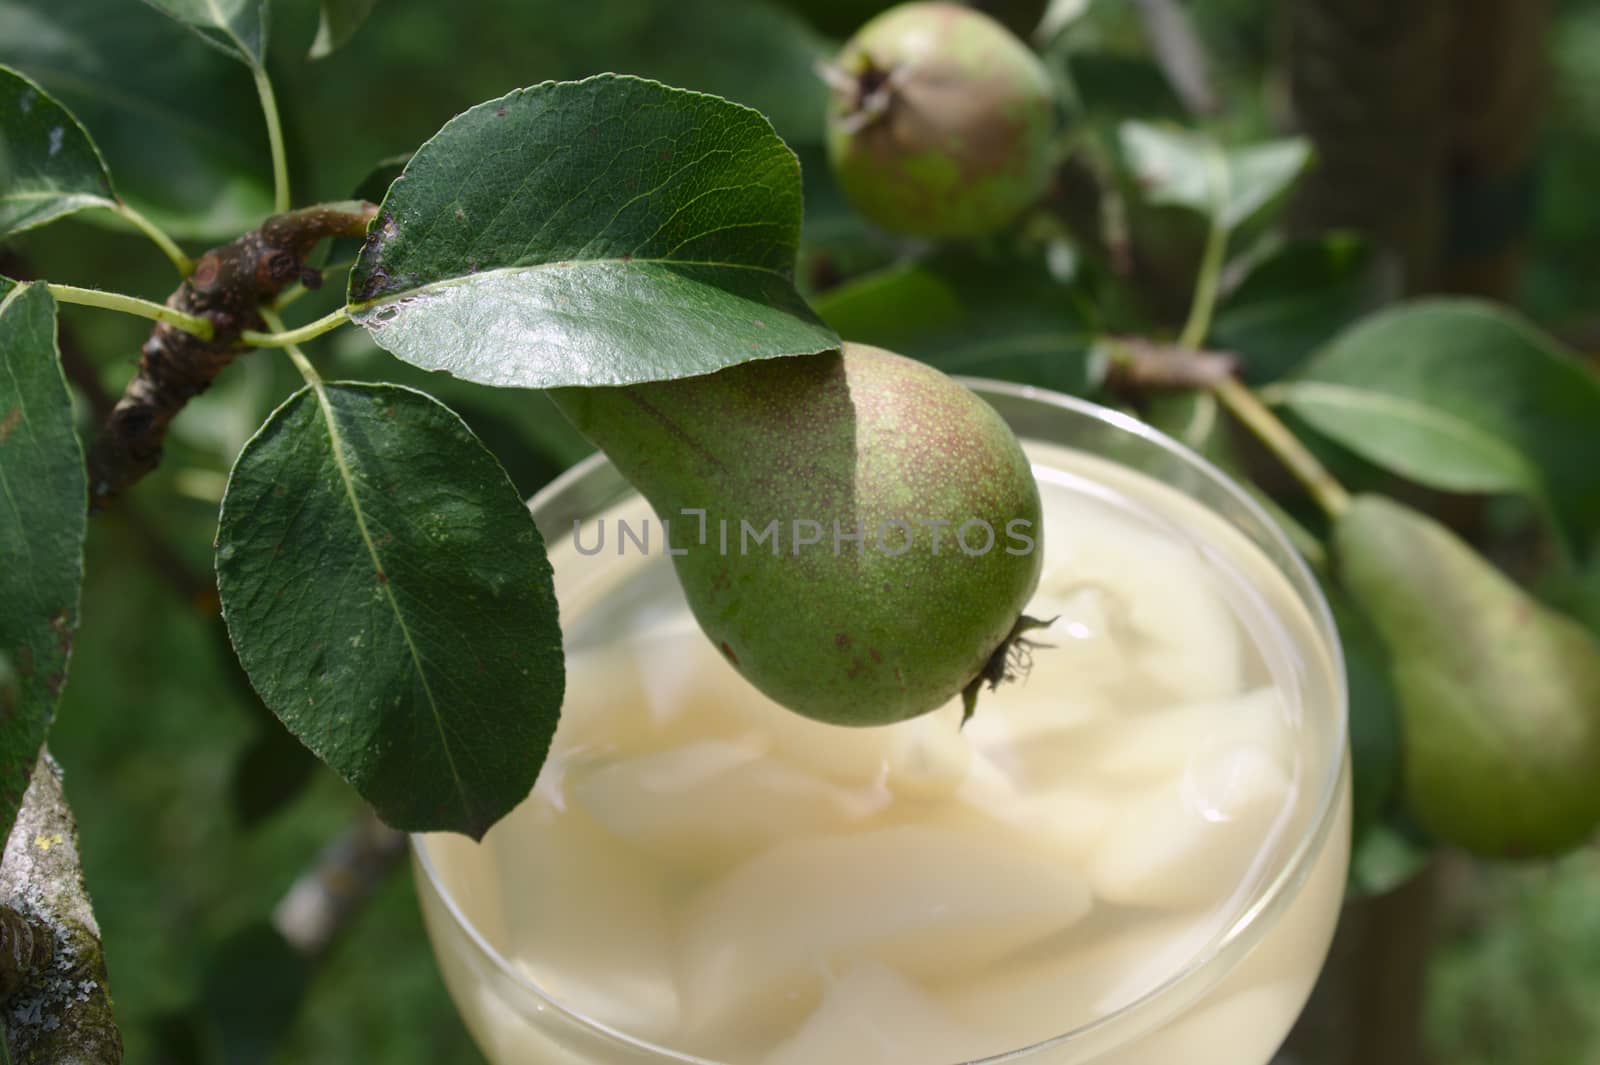 The pictureshows a pear dessert on a pear tree